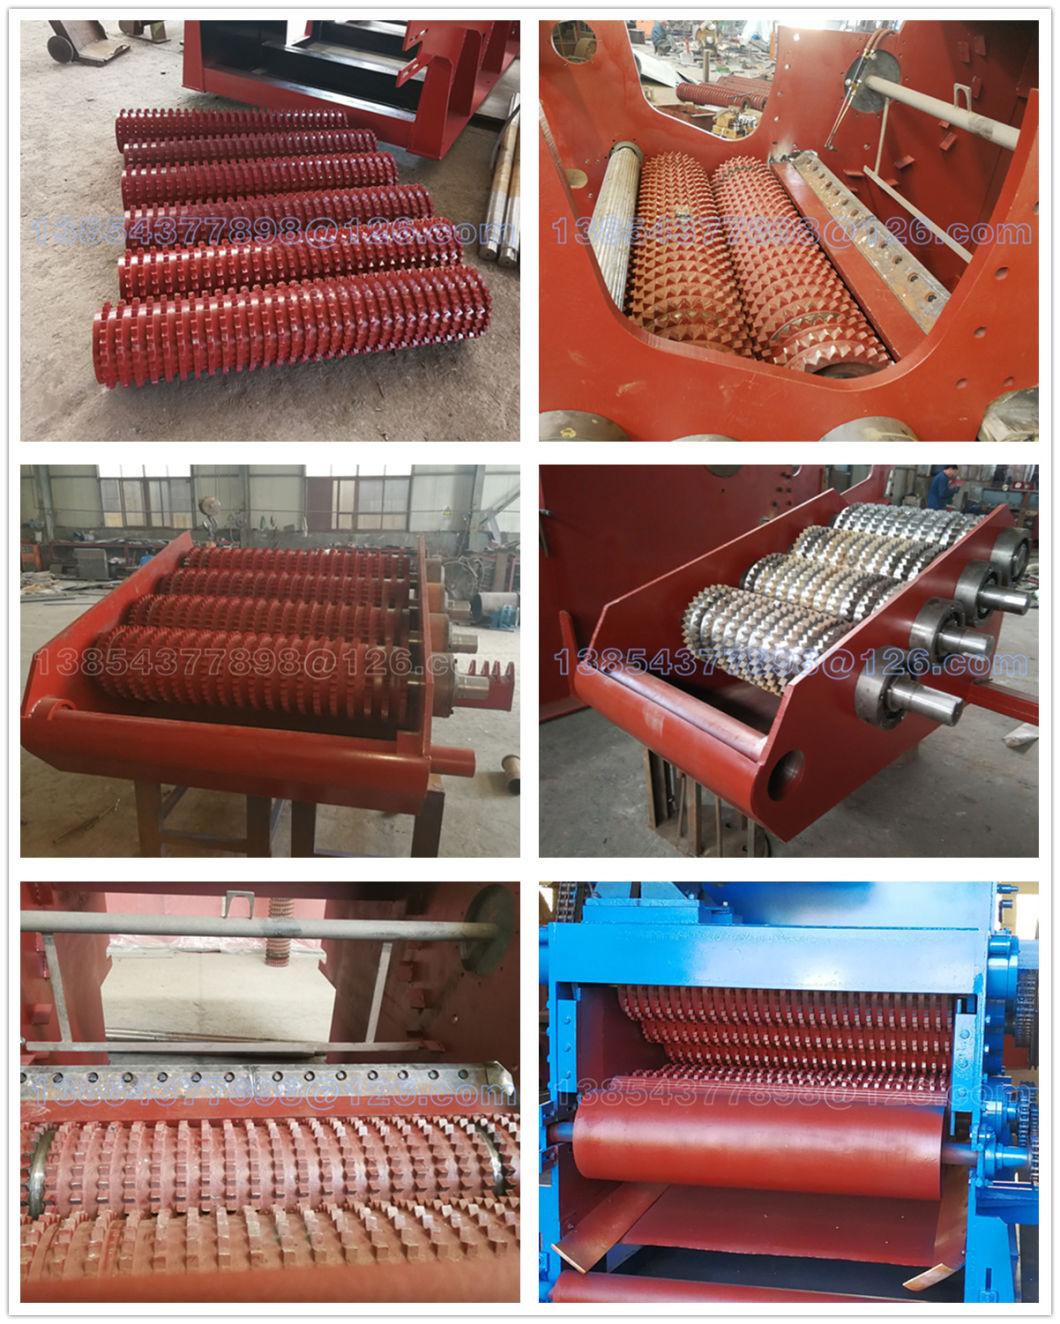 Wood Chipping Machine Feed Roller Wood Chipping Machine Feed Rollers 302